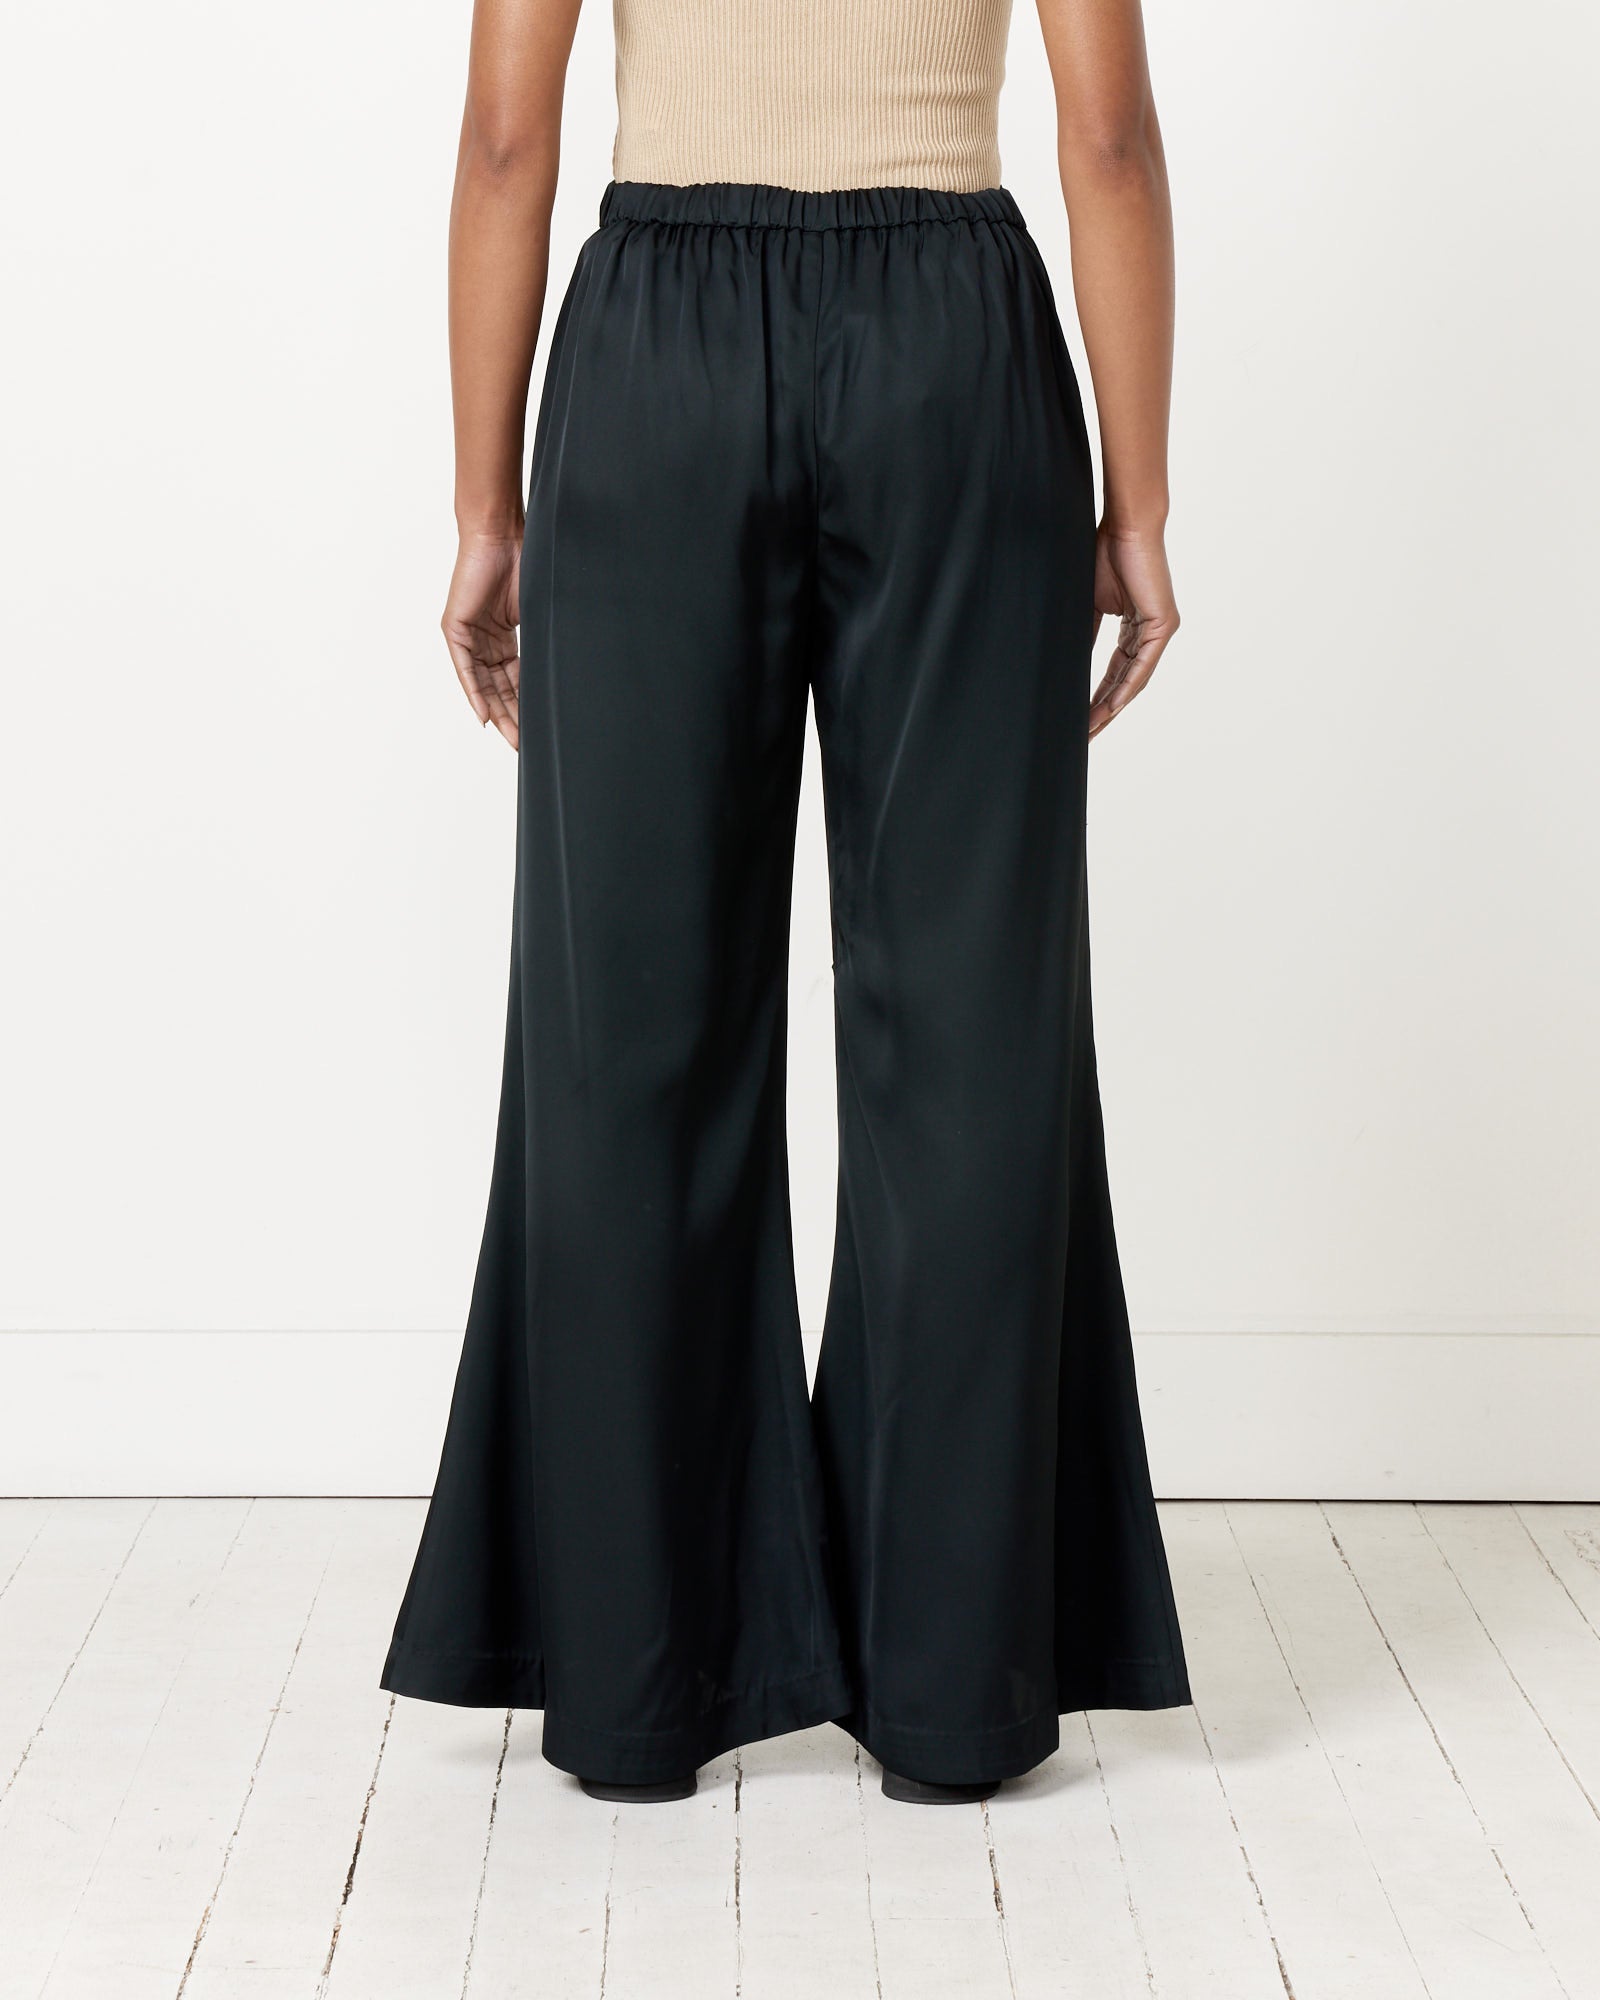 Lucee Pant in Black